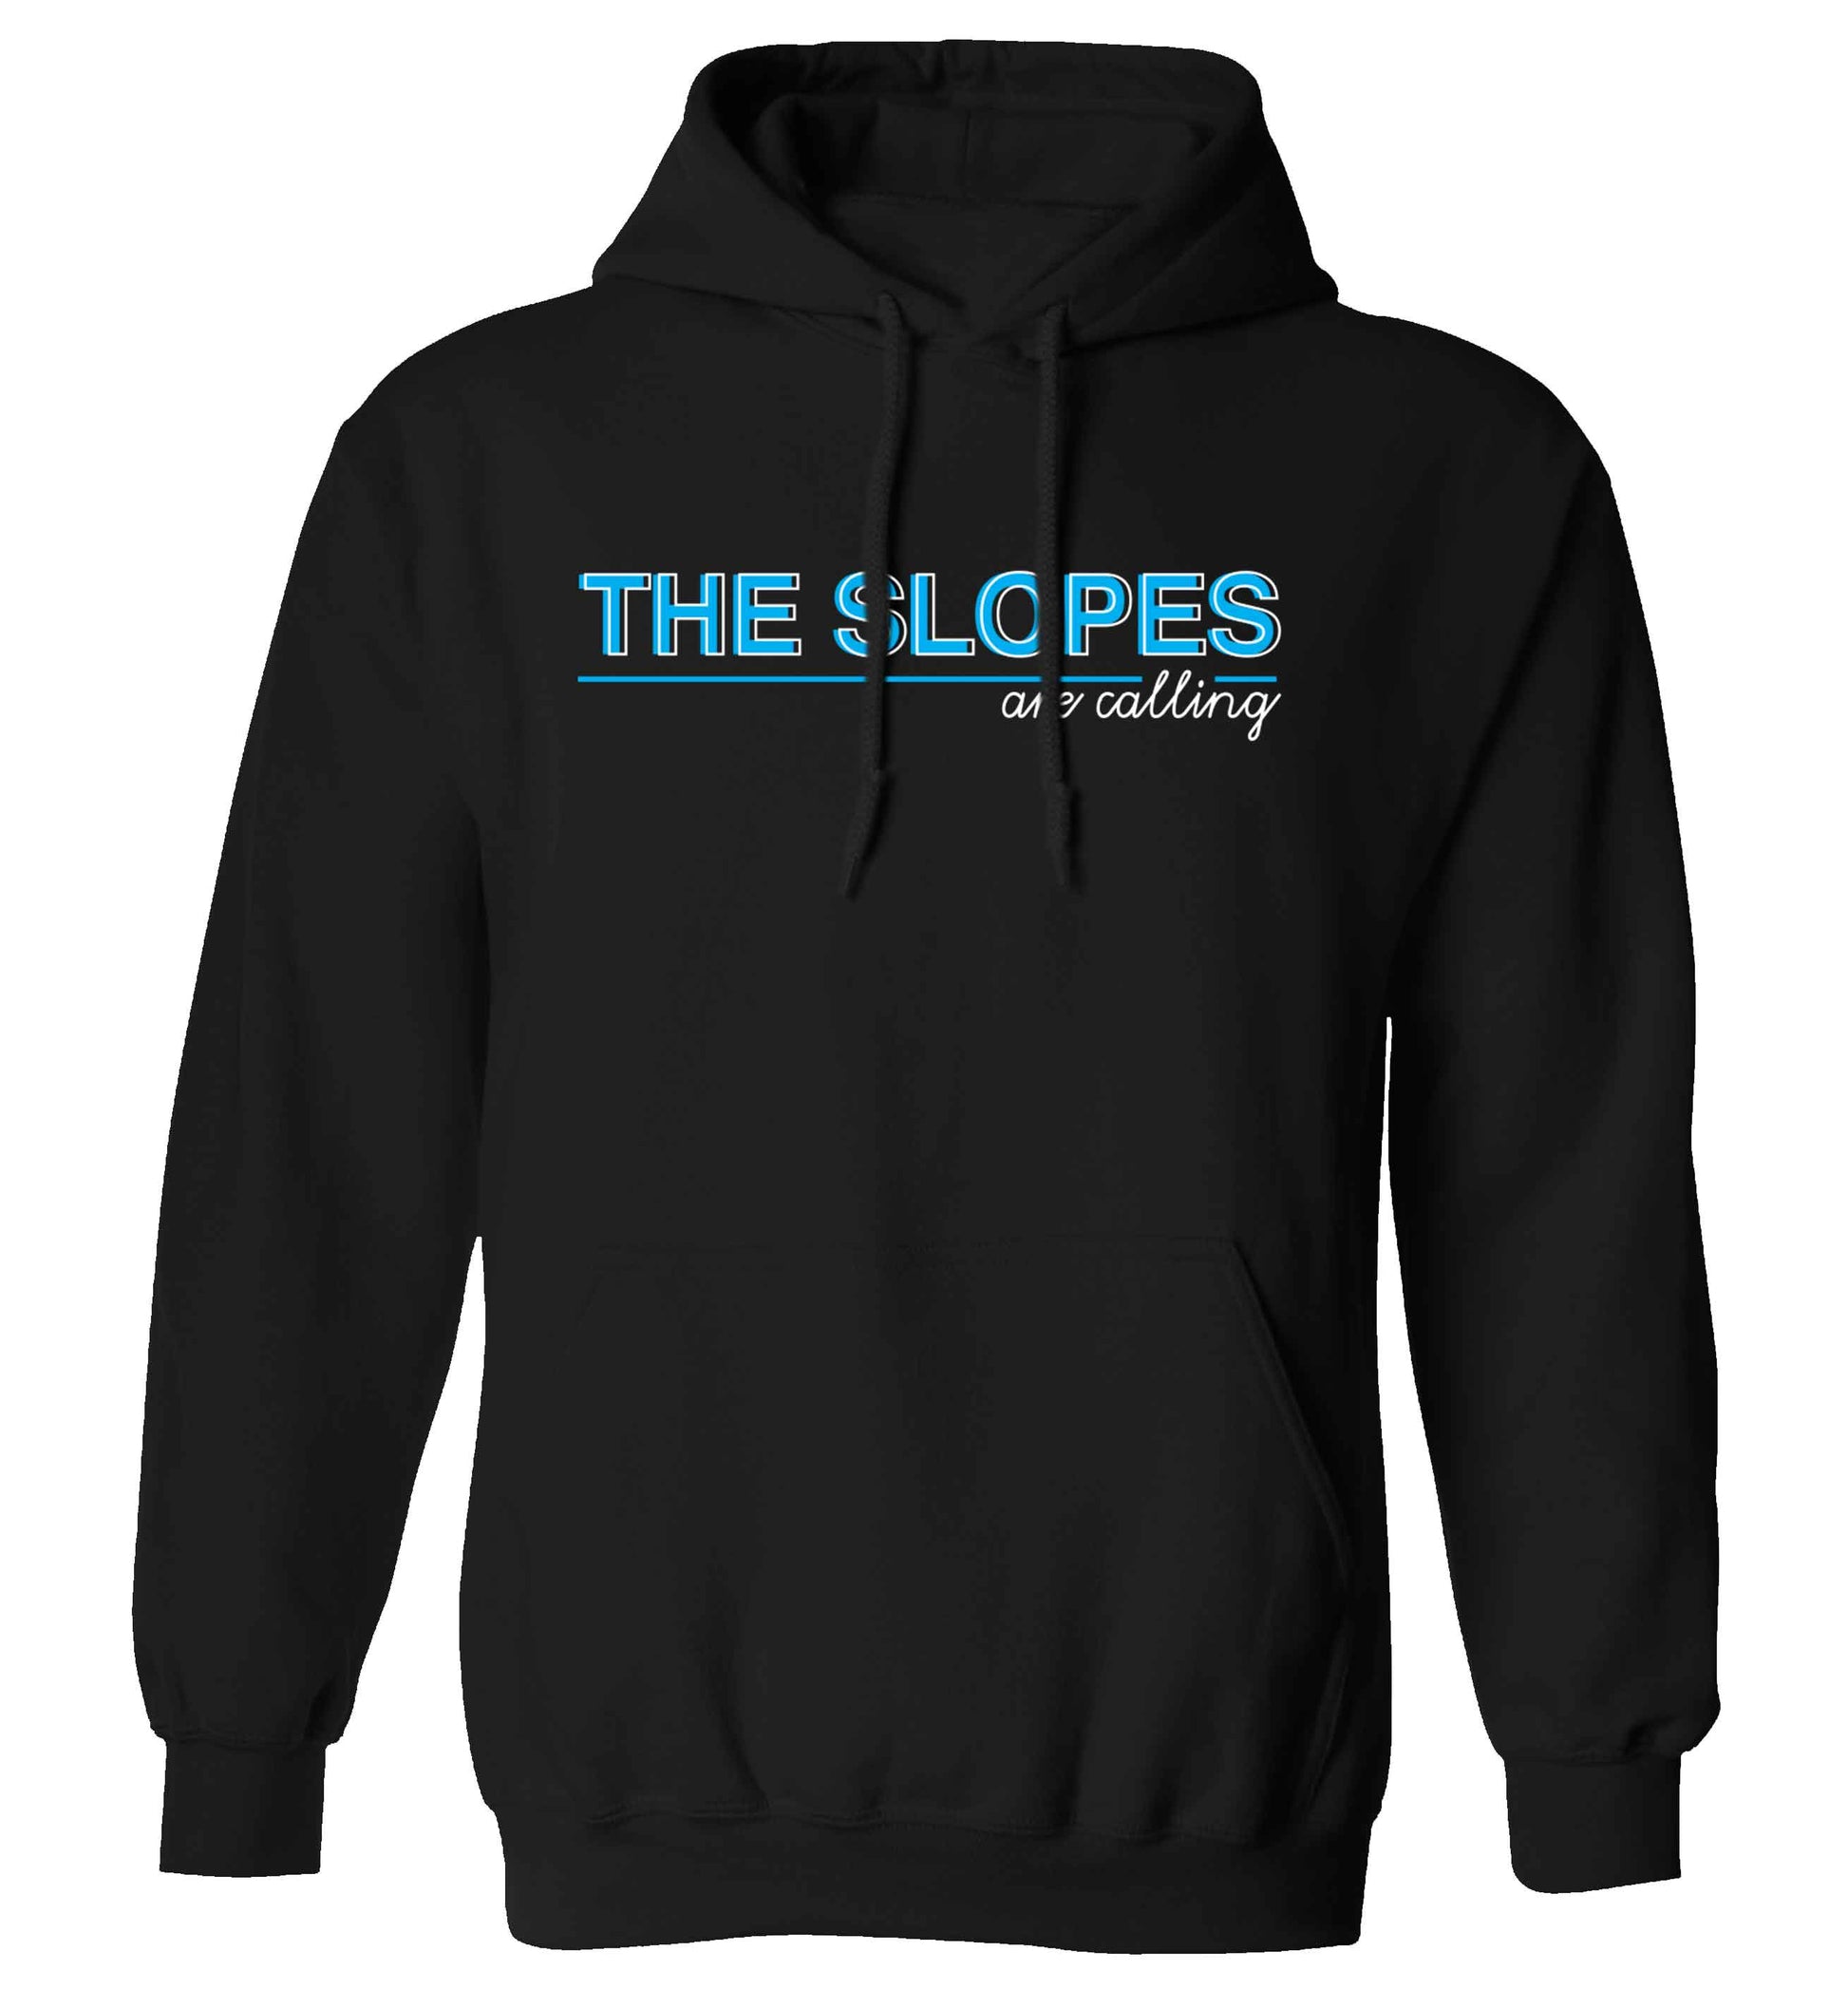 The slopes are calling adults unisex black hoodie 2XL